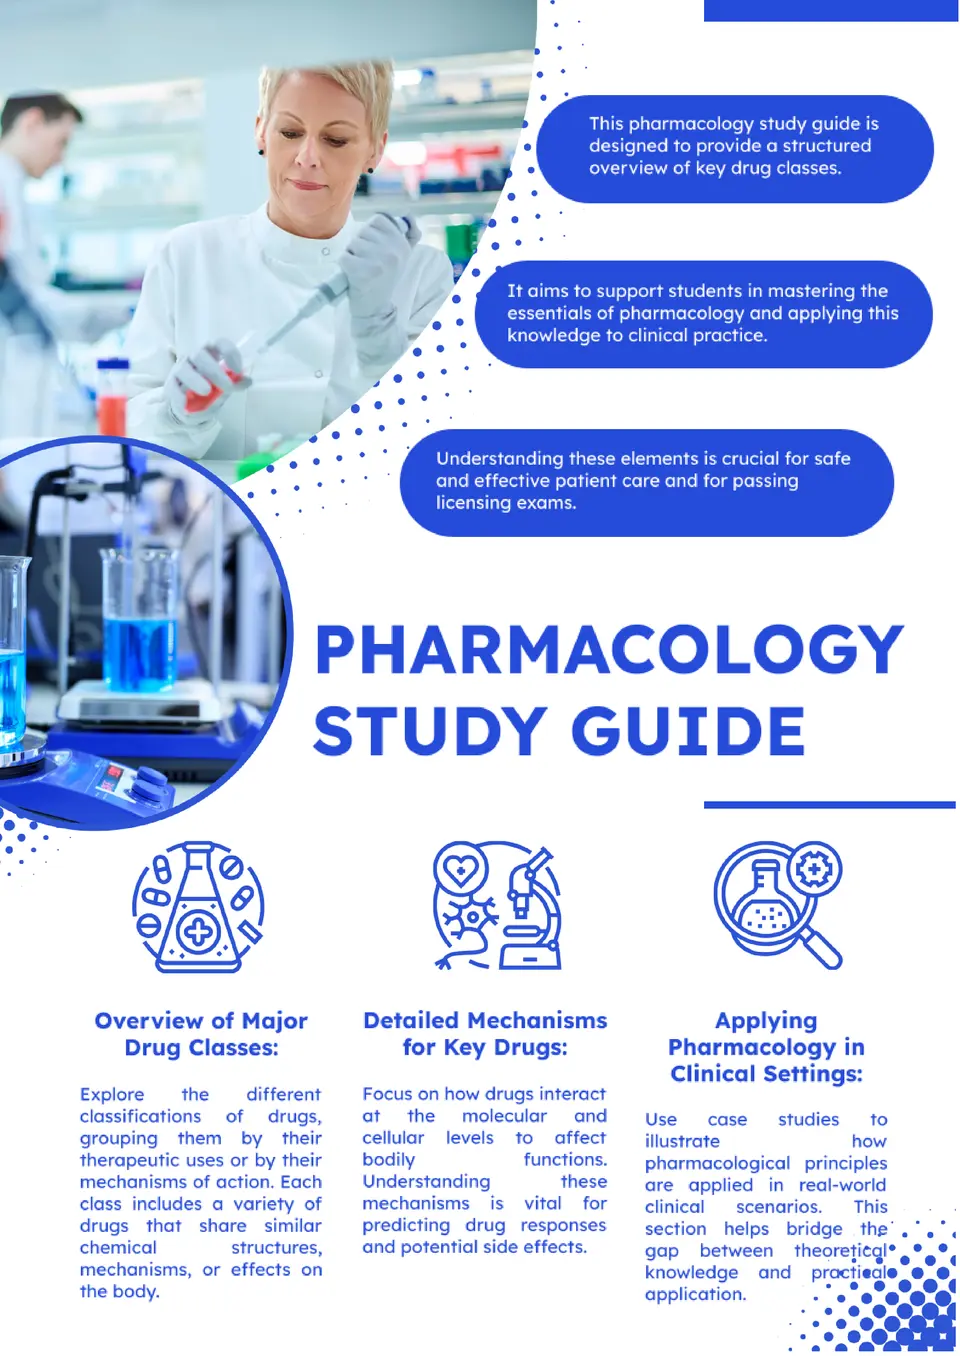 Pharmacology Study Guide Template